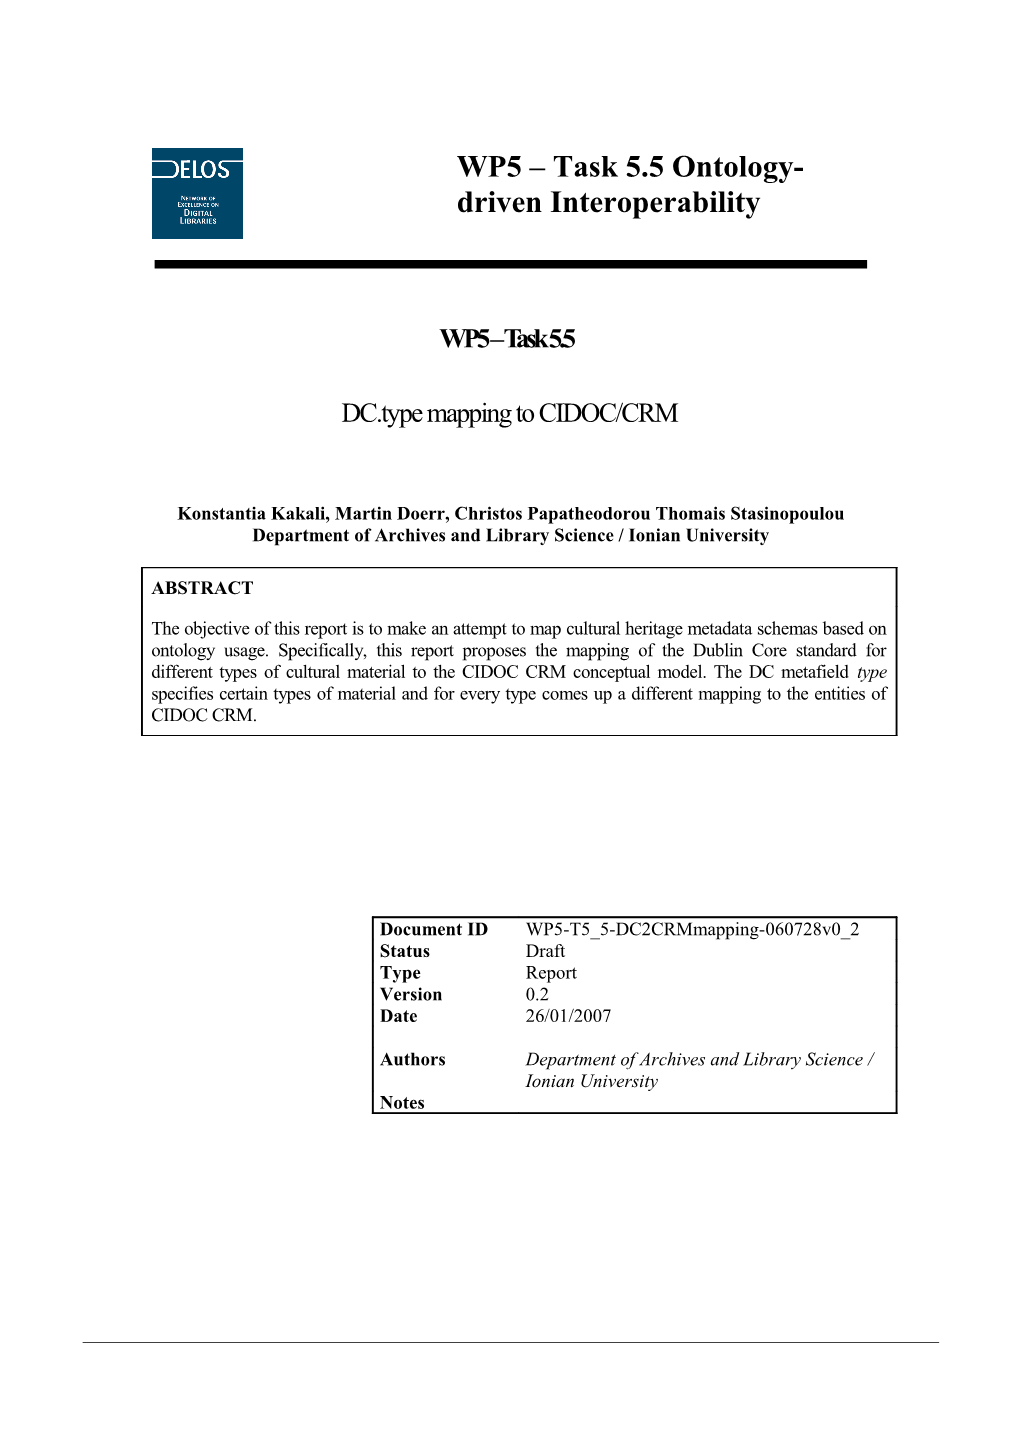 DC.Type Mapping to CIDOC/CRM